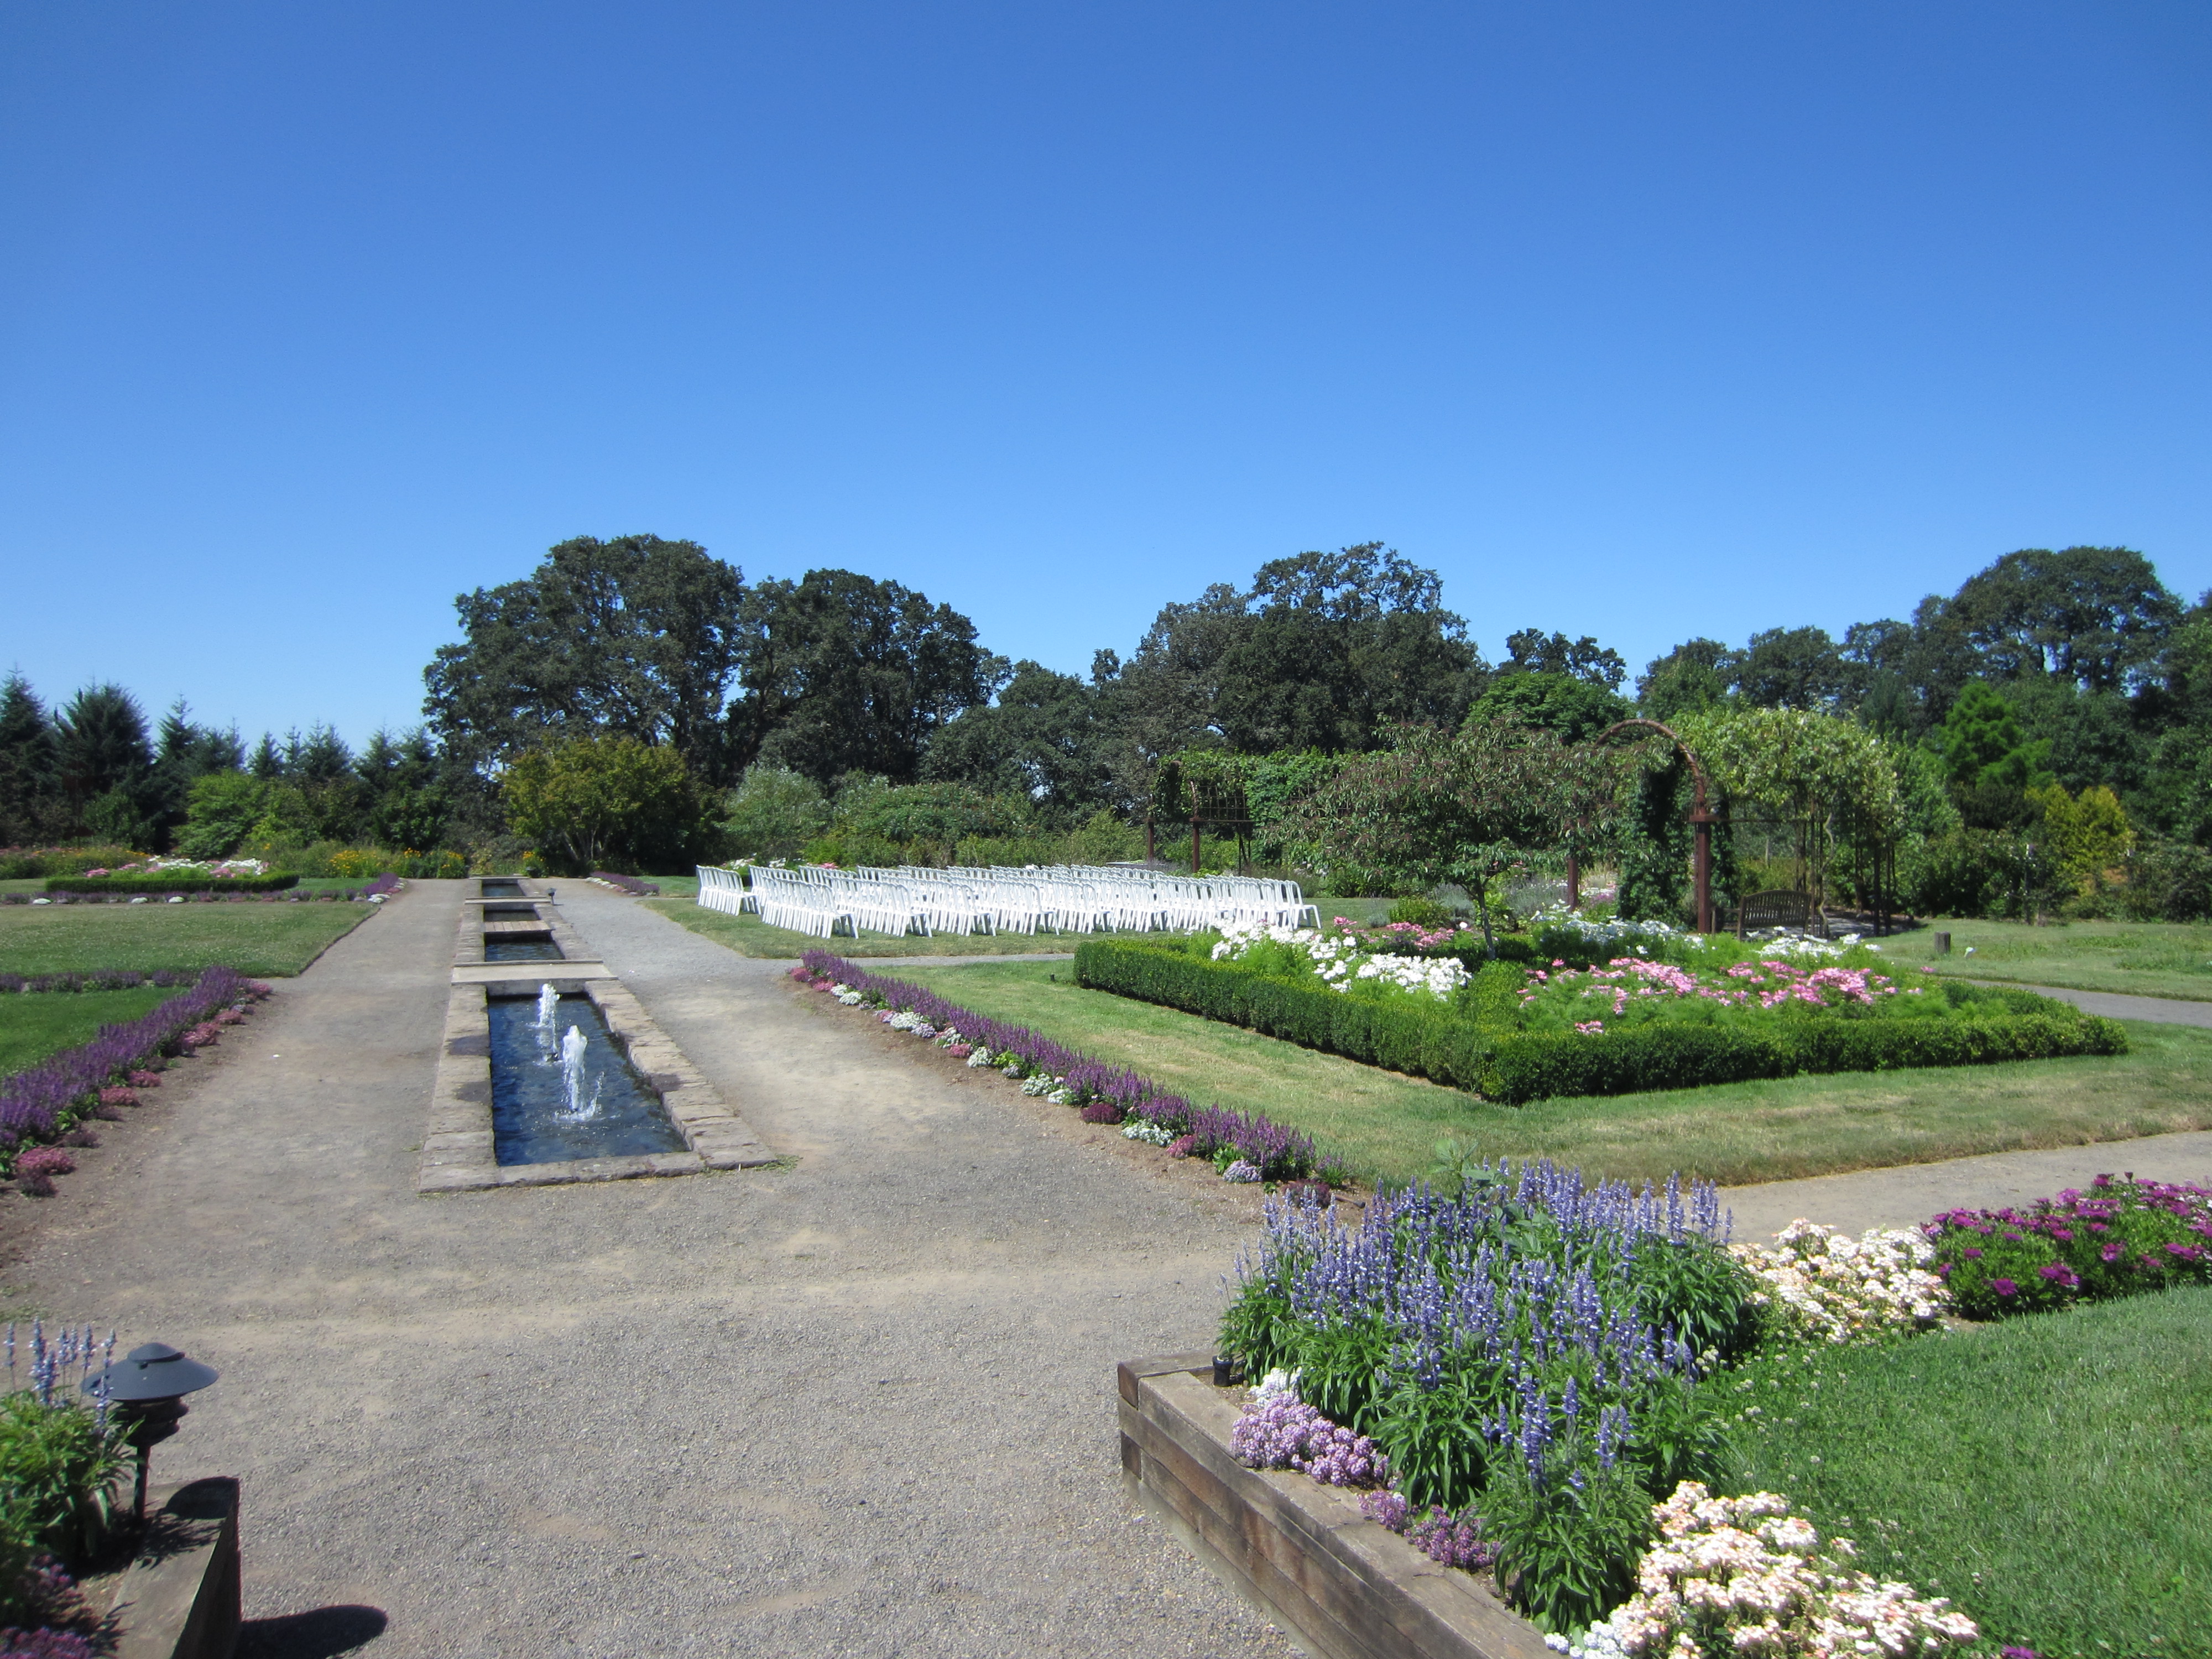 The Oregon Gardens – Not Your Average Engineer